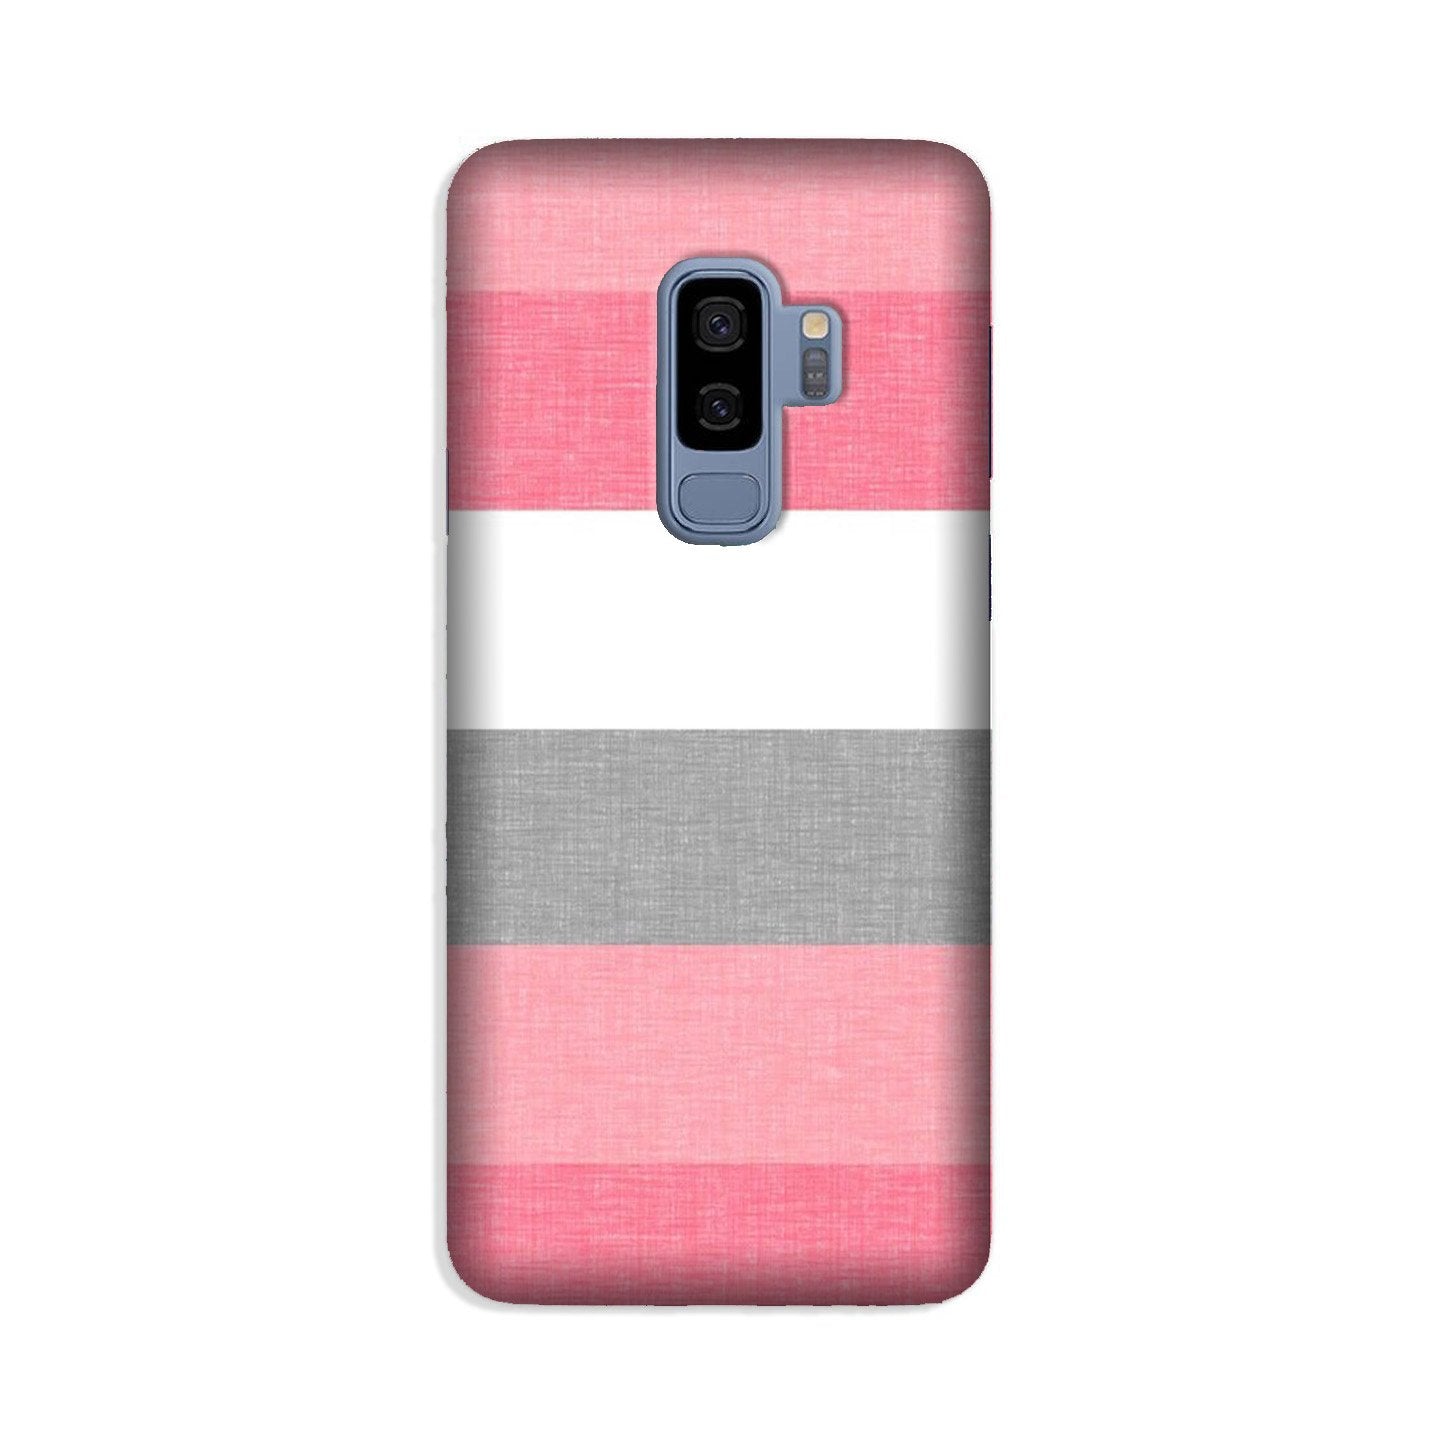 Pink white pattern Case for Galaxy S9 Plus